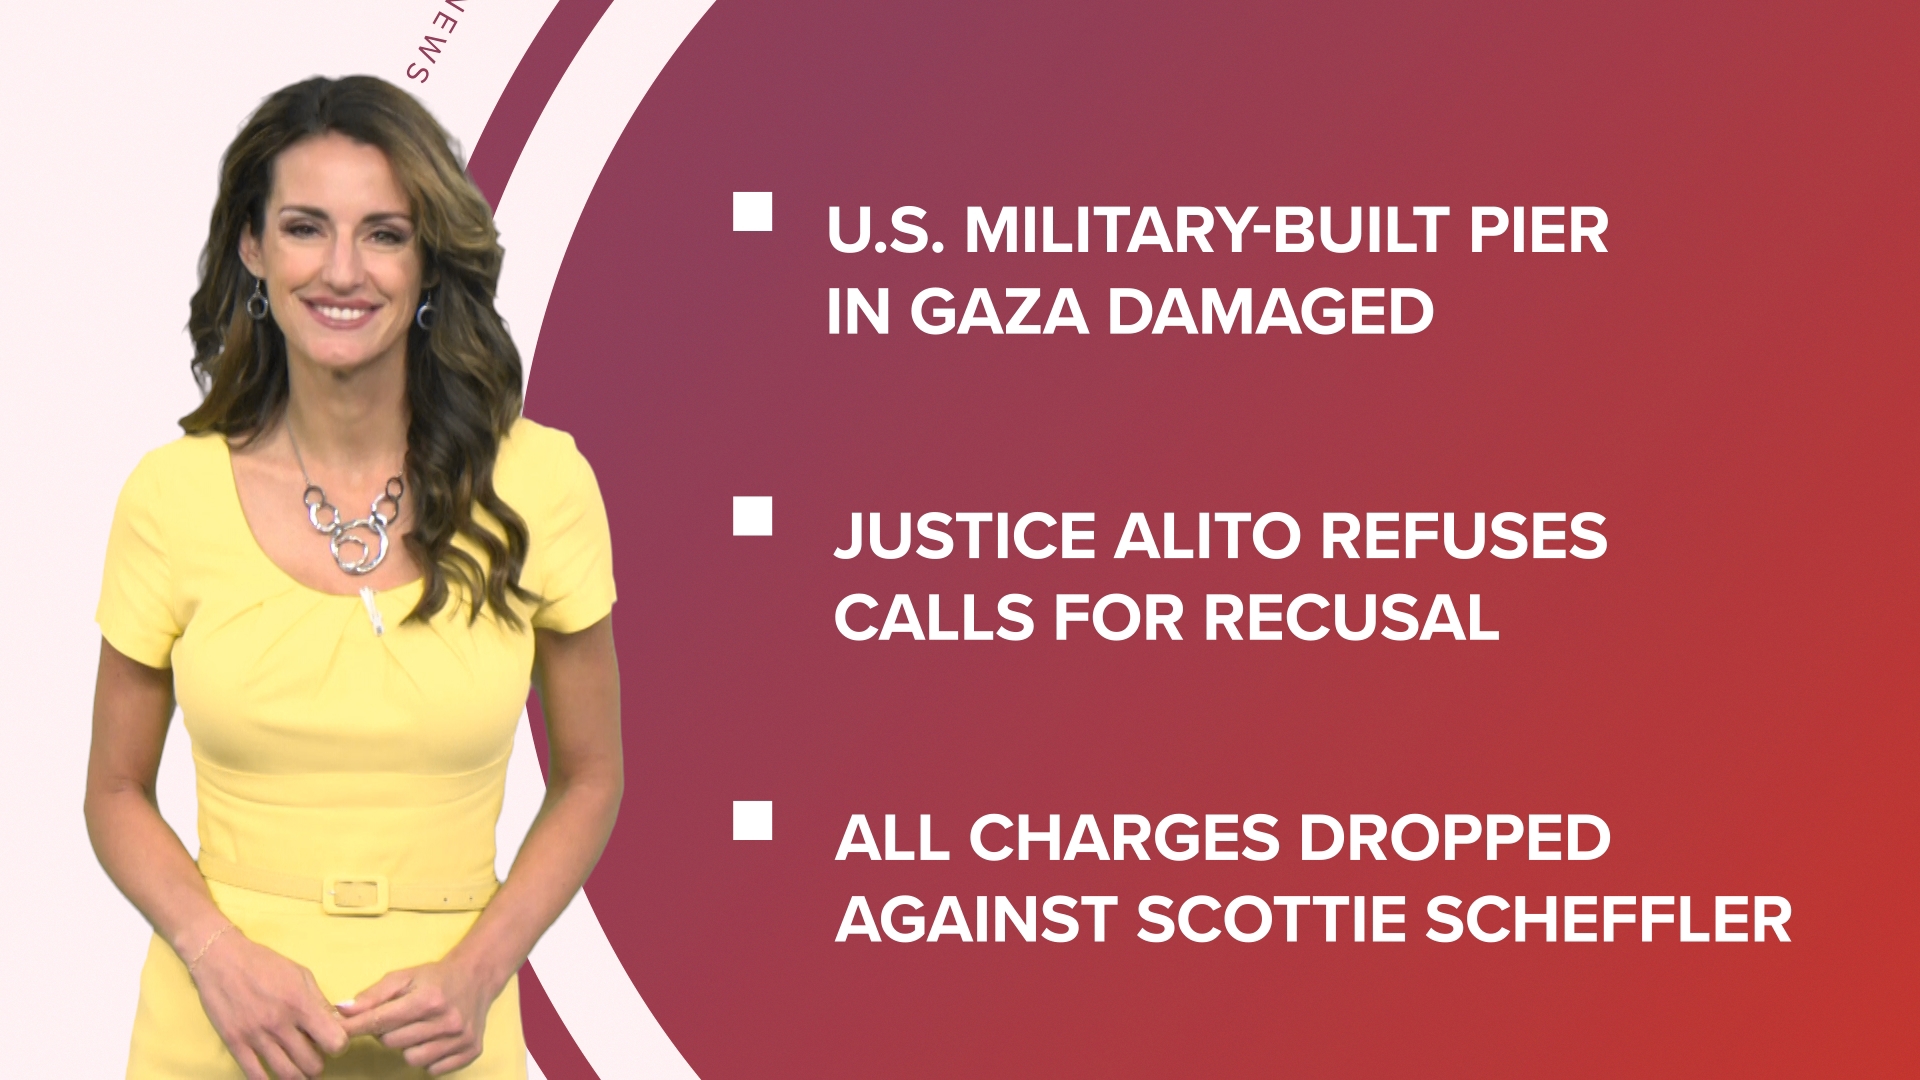 A look at what is happening in the news from Justice Alito refusing calls for recusal to all charges dropped against golfer Scottie Scheffler and more.